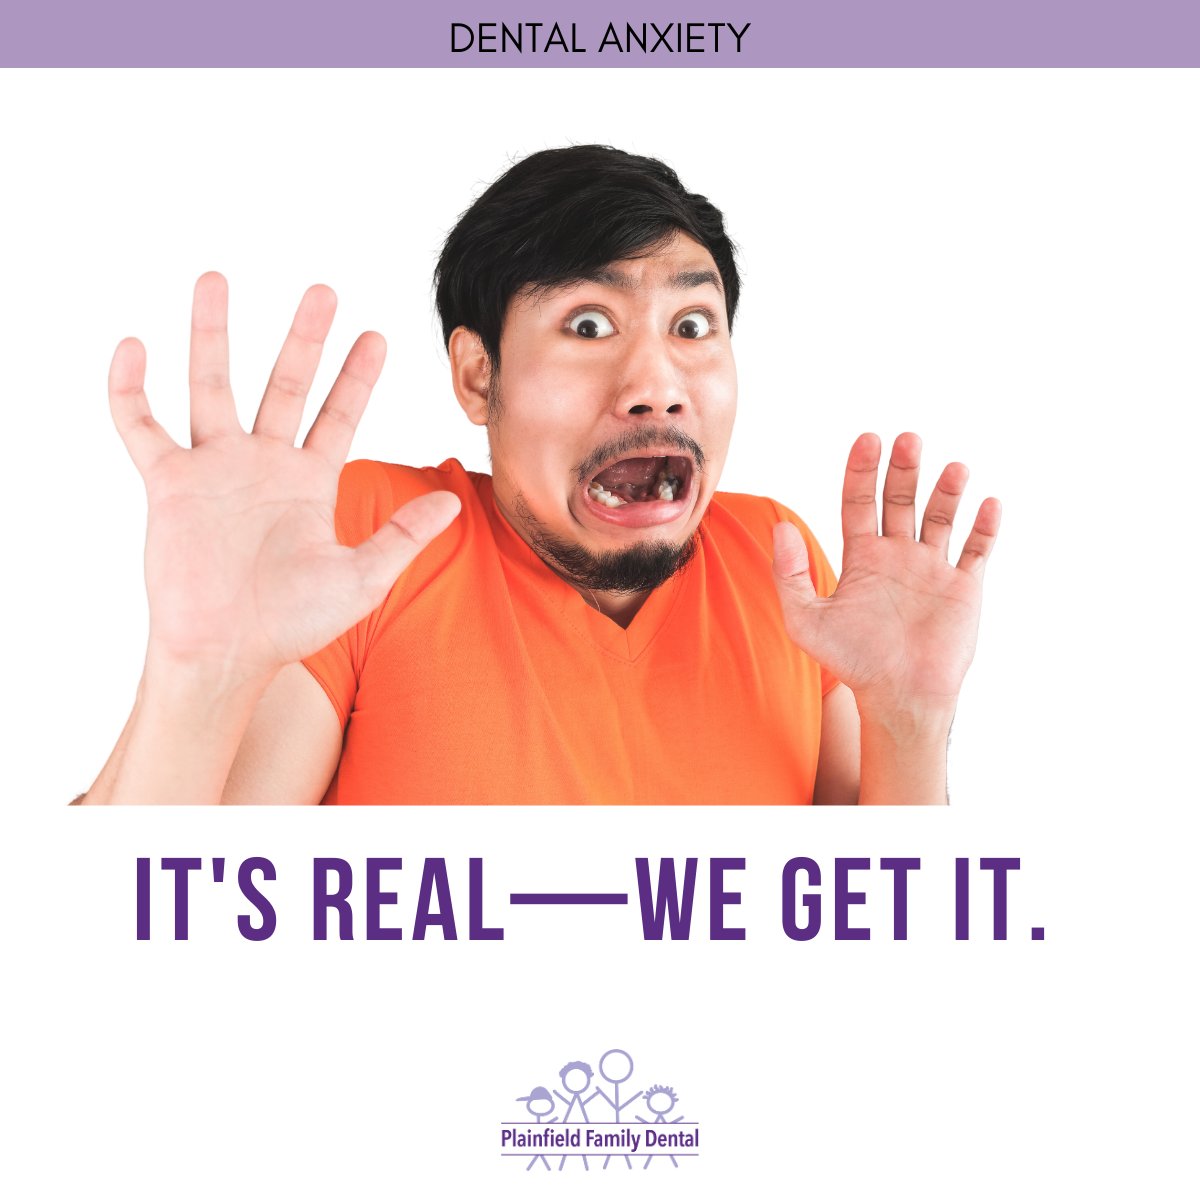 🤗 We understand that dental anxiety is real. That's why we're committed to making your visits as comfortable as possible. Tell us about your past experiences, and let's work together to make your next appointment a positive one! #DentalAnxiety #WellnessWednesday